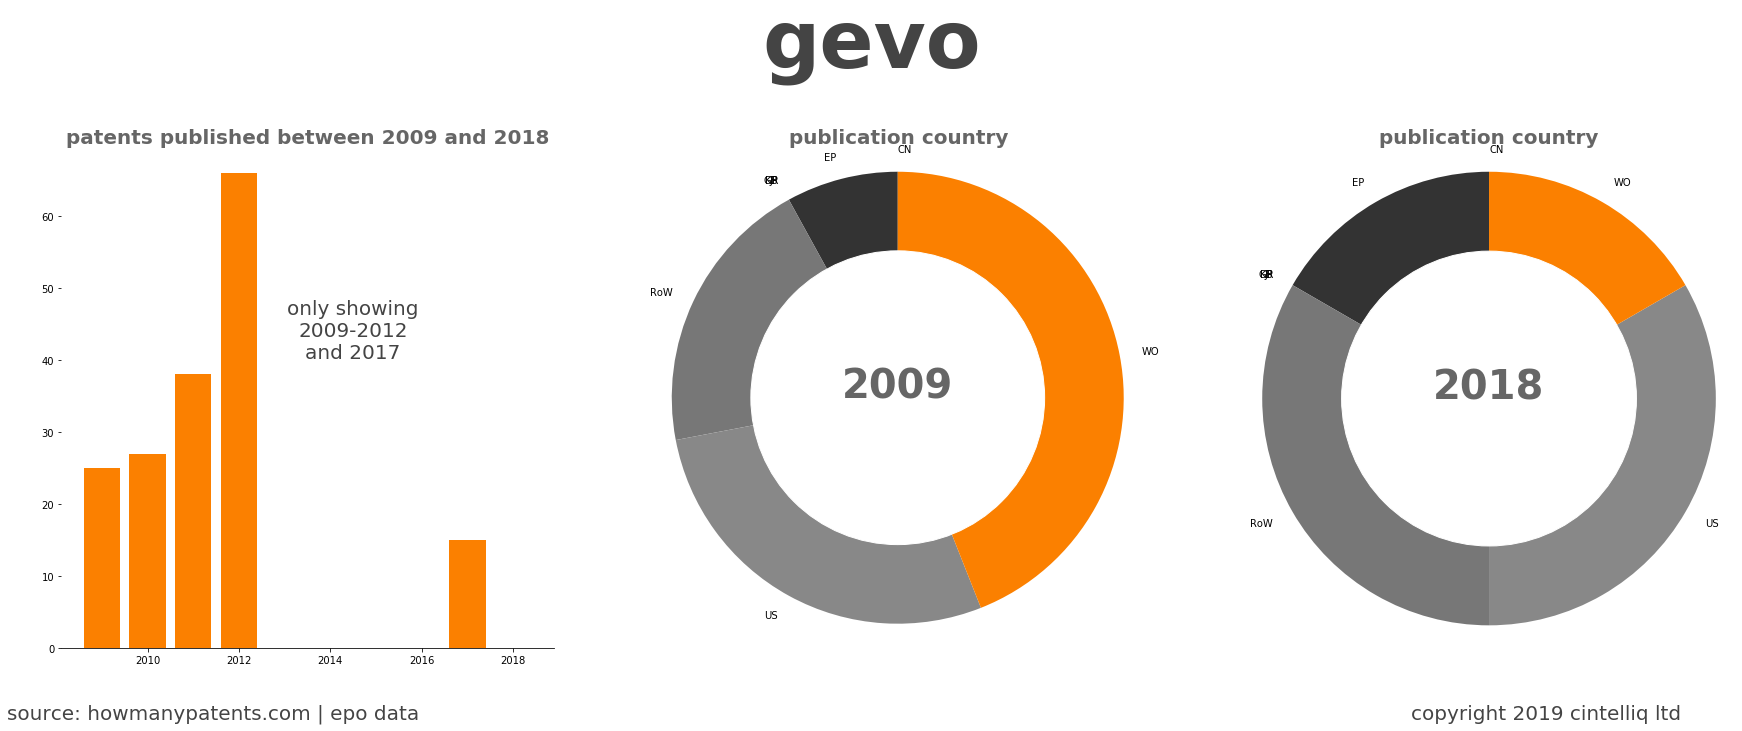 summary of patents for Gevo